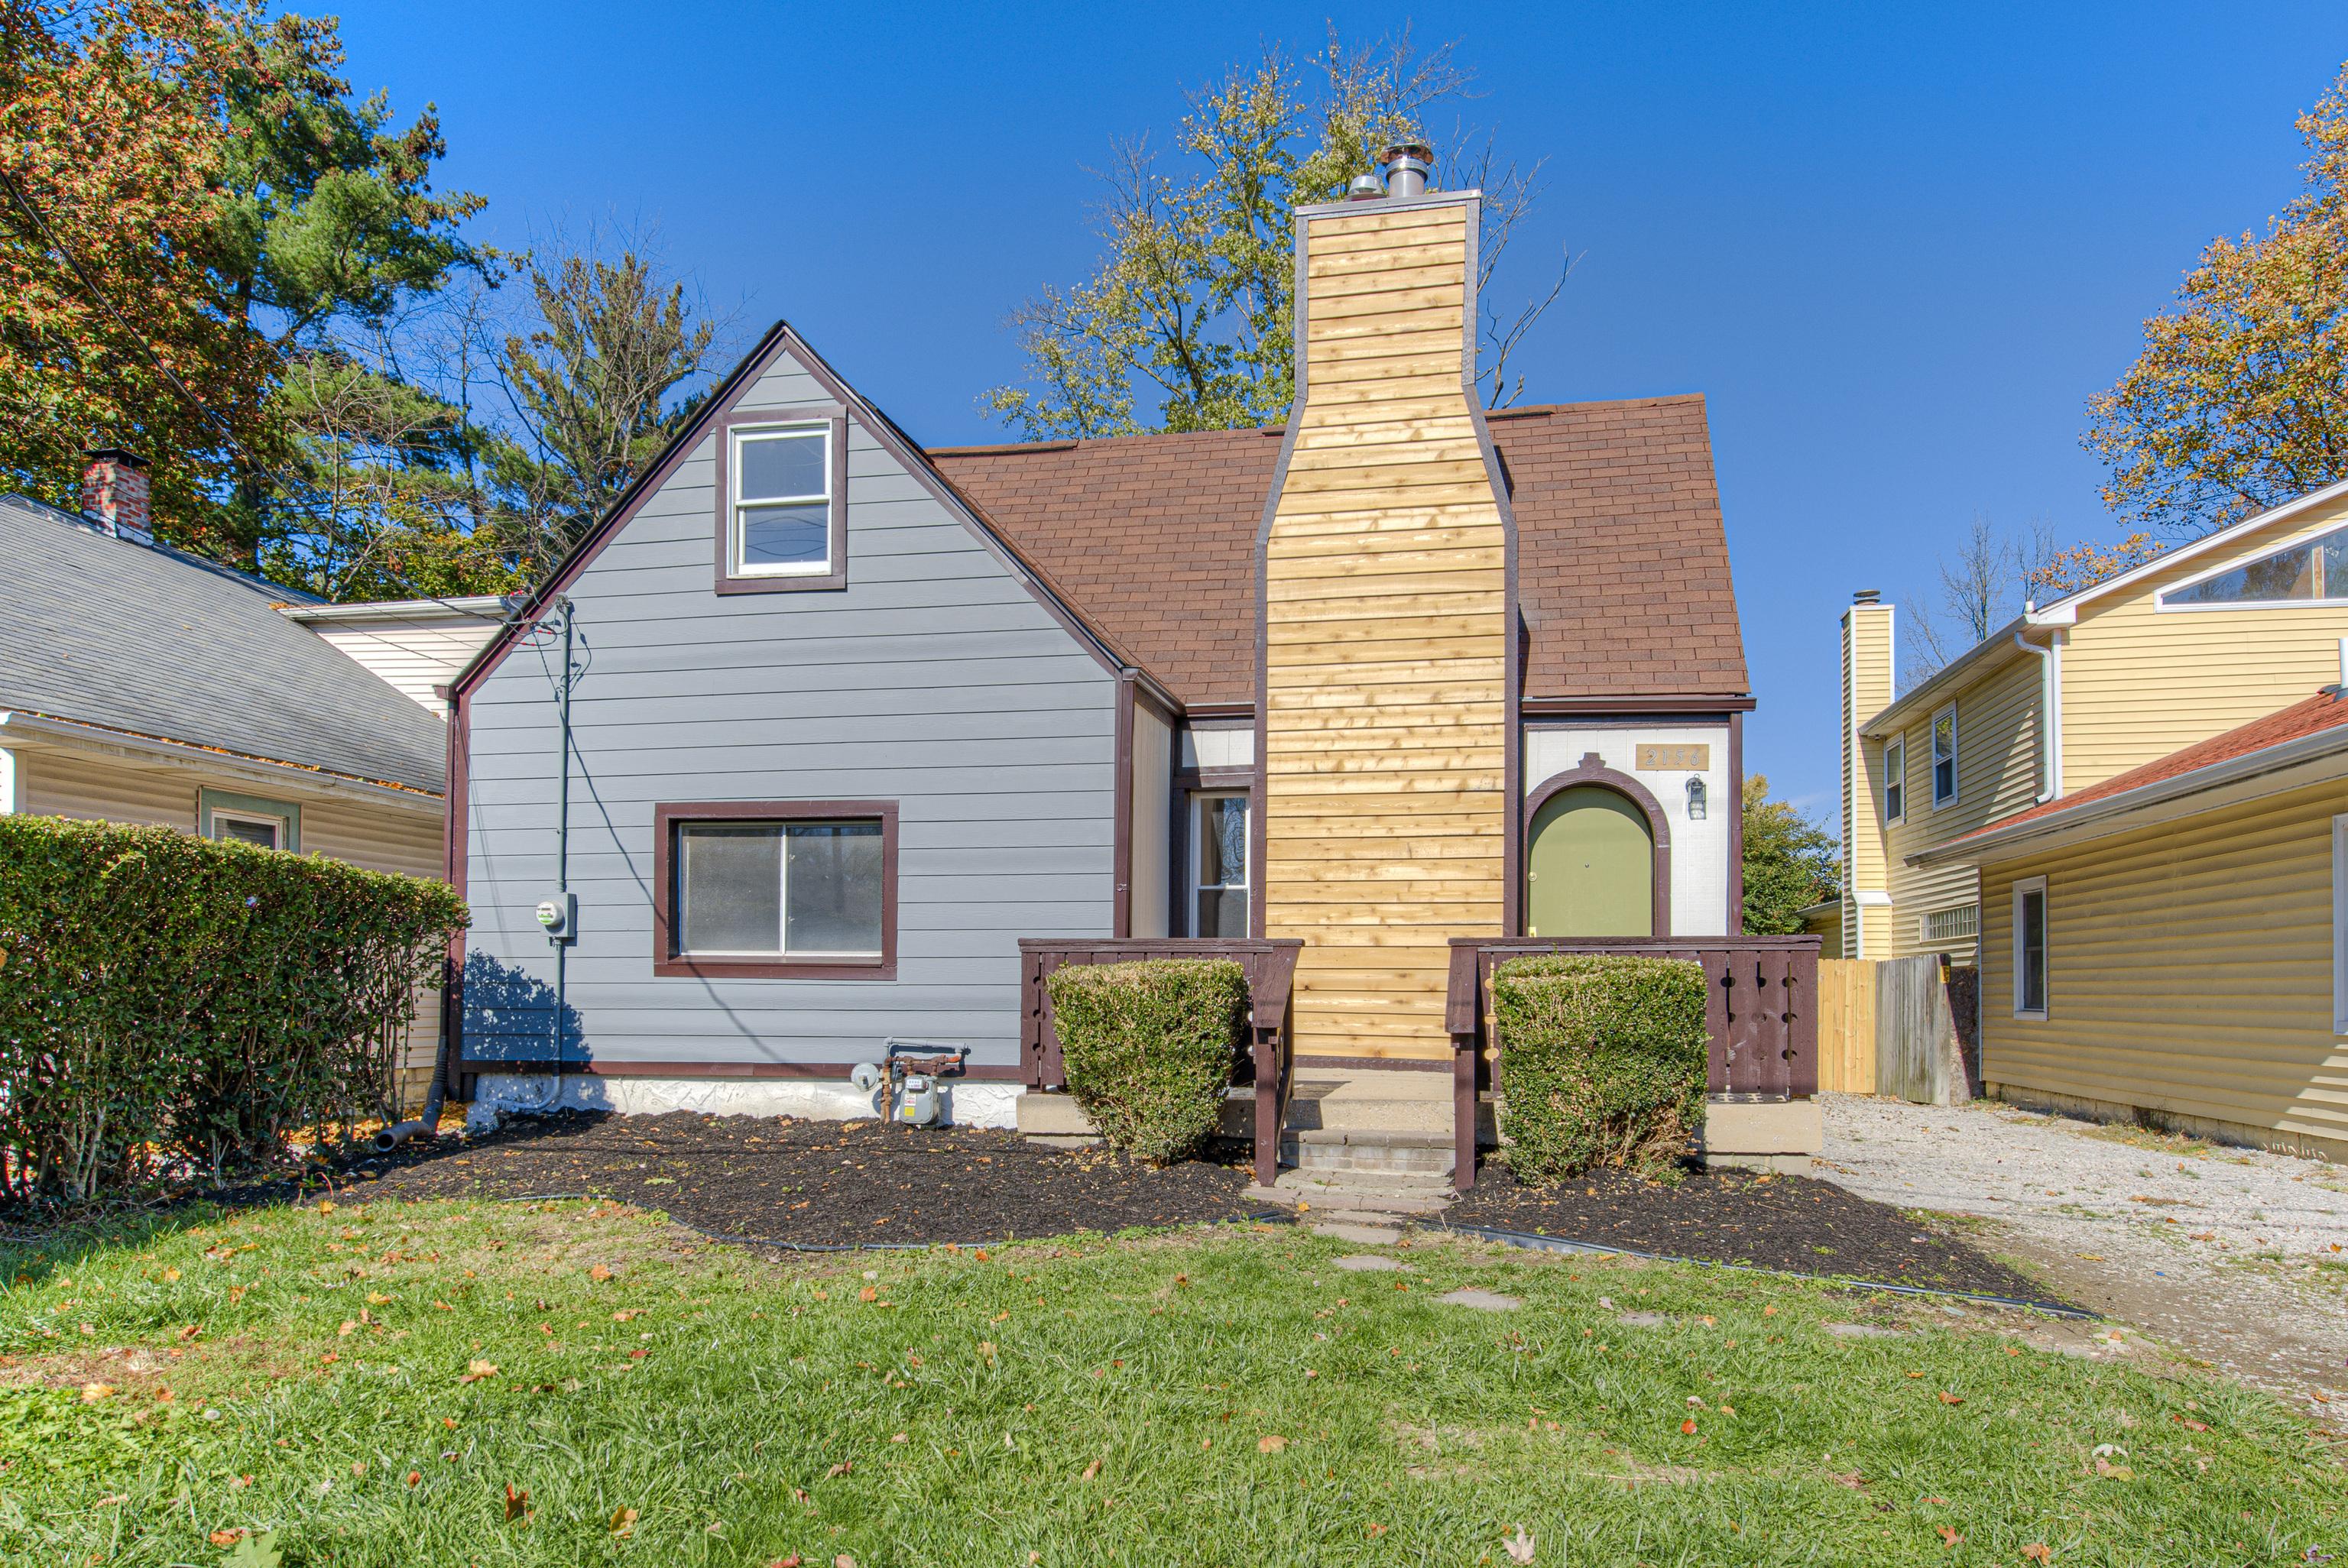 Photo one of 2156 W 58Th St Indianapolis IN 46228 | MLS 21951879